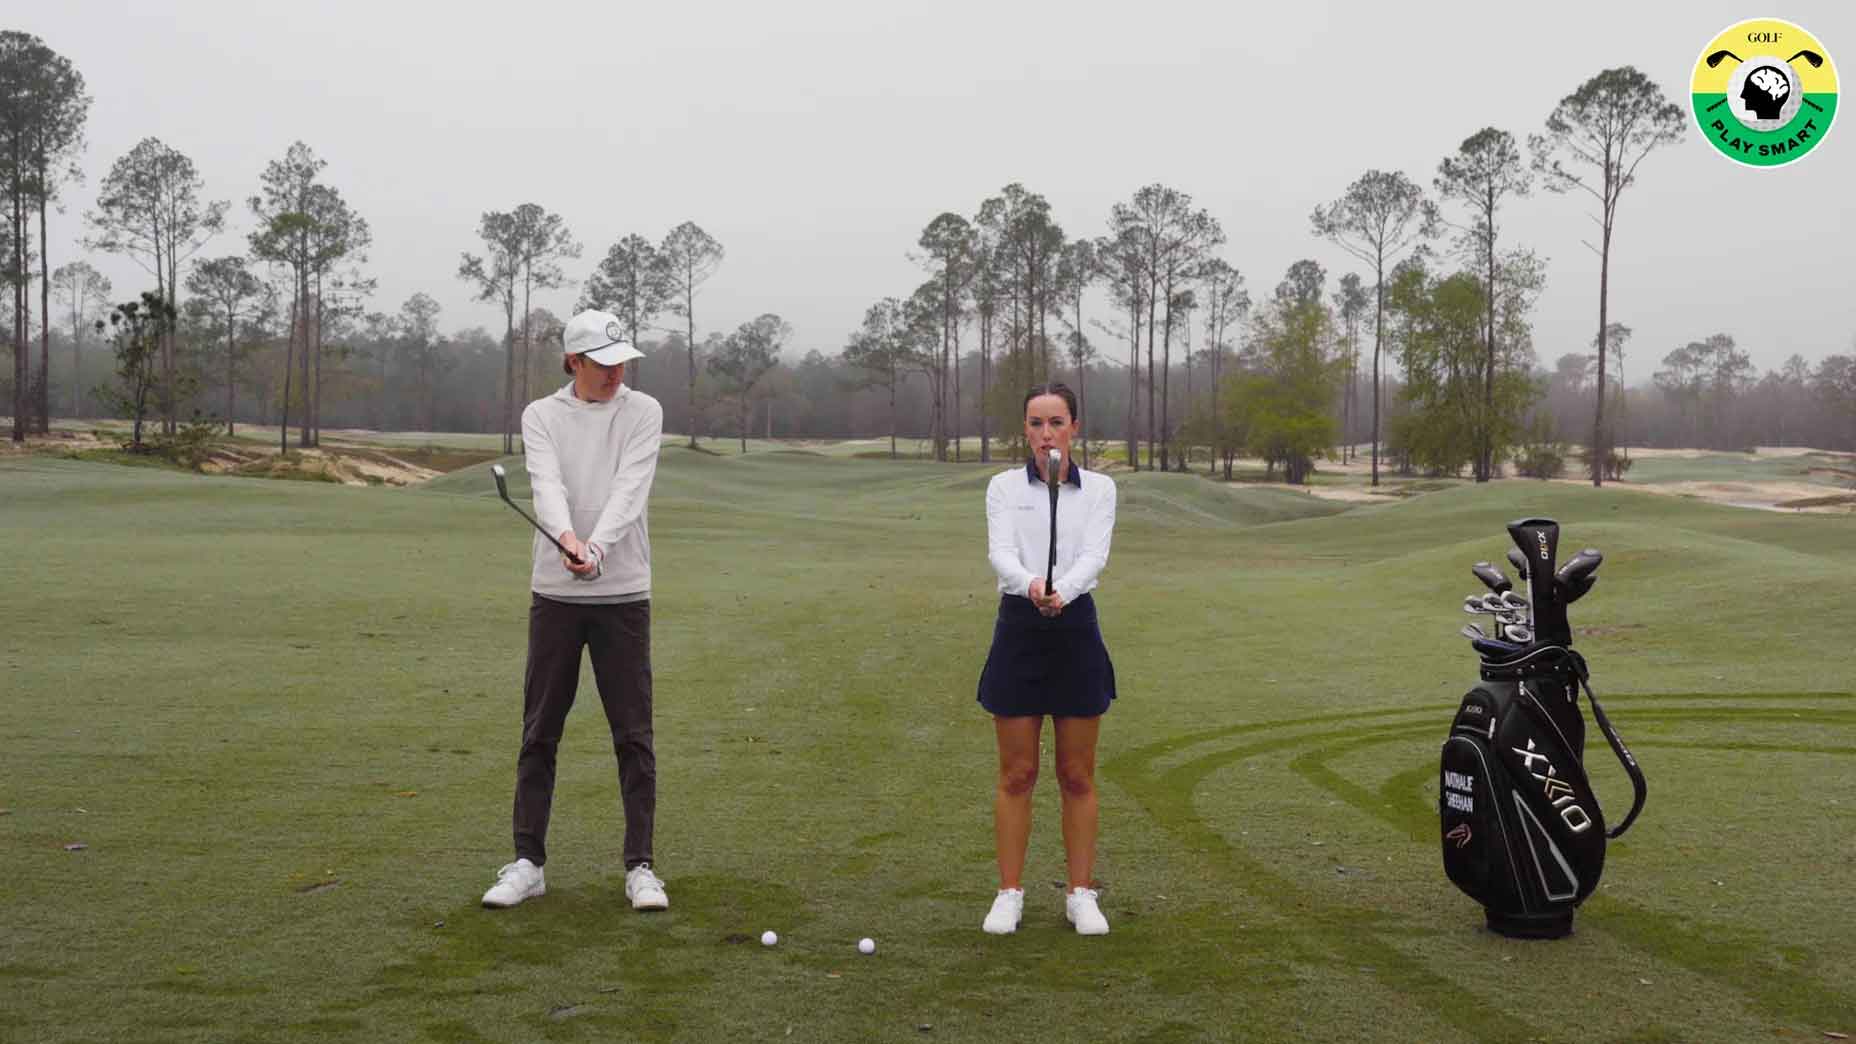 Caught the shanks during your round? Here's what you should do